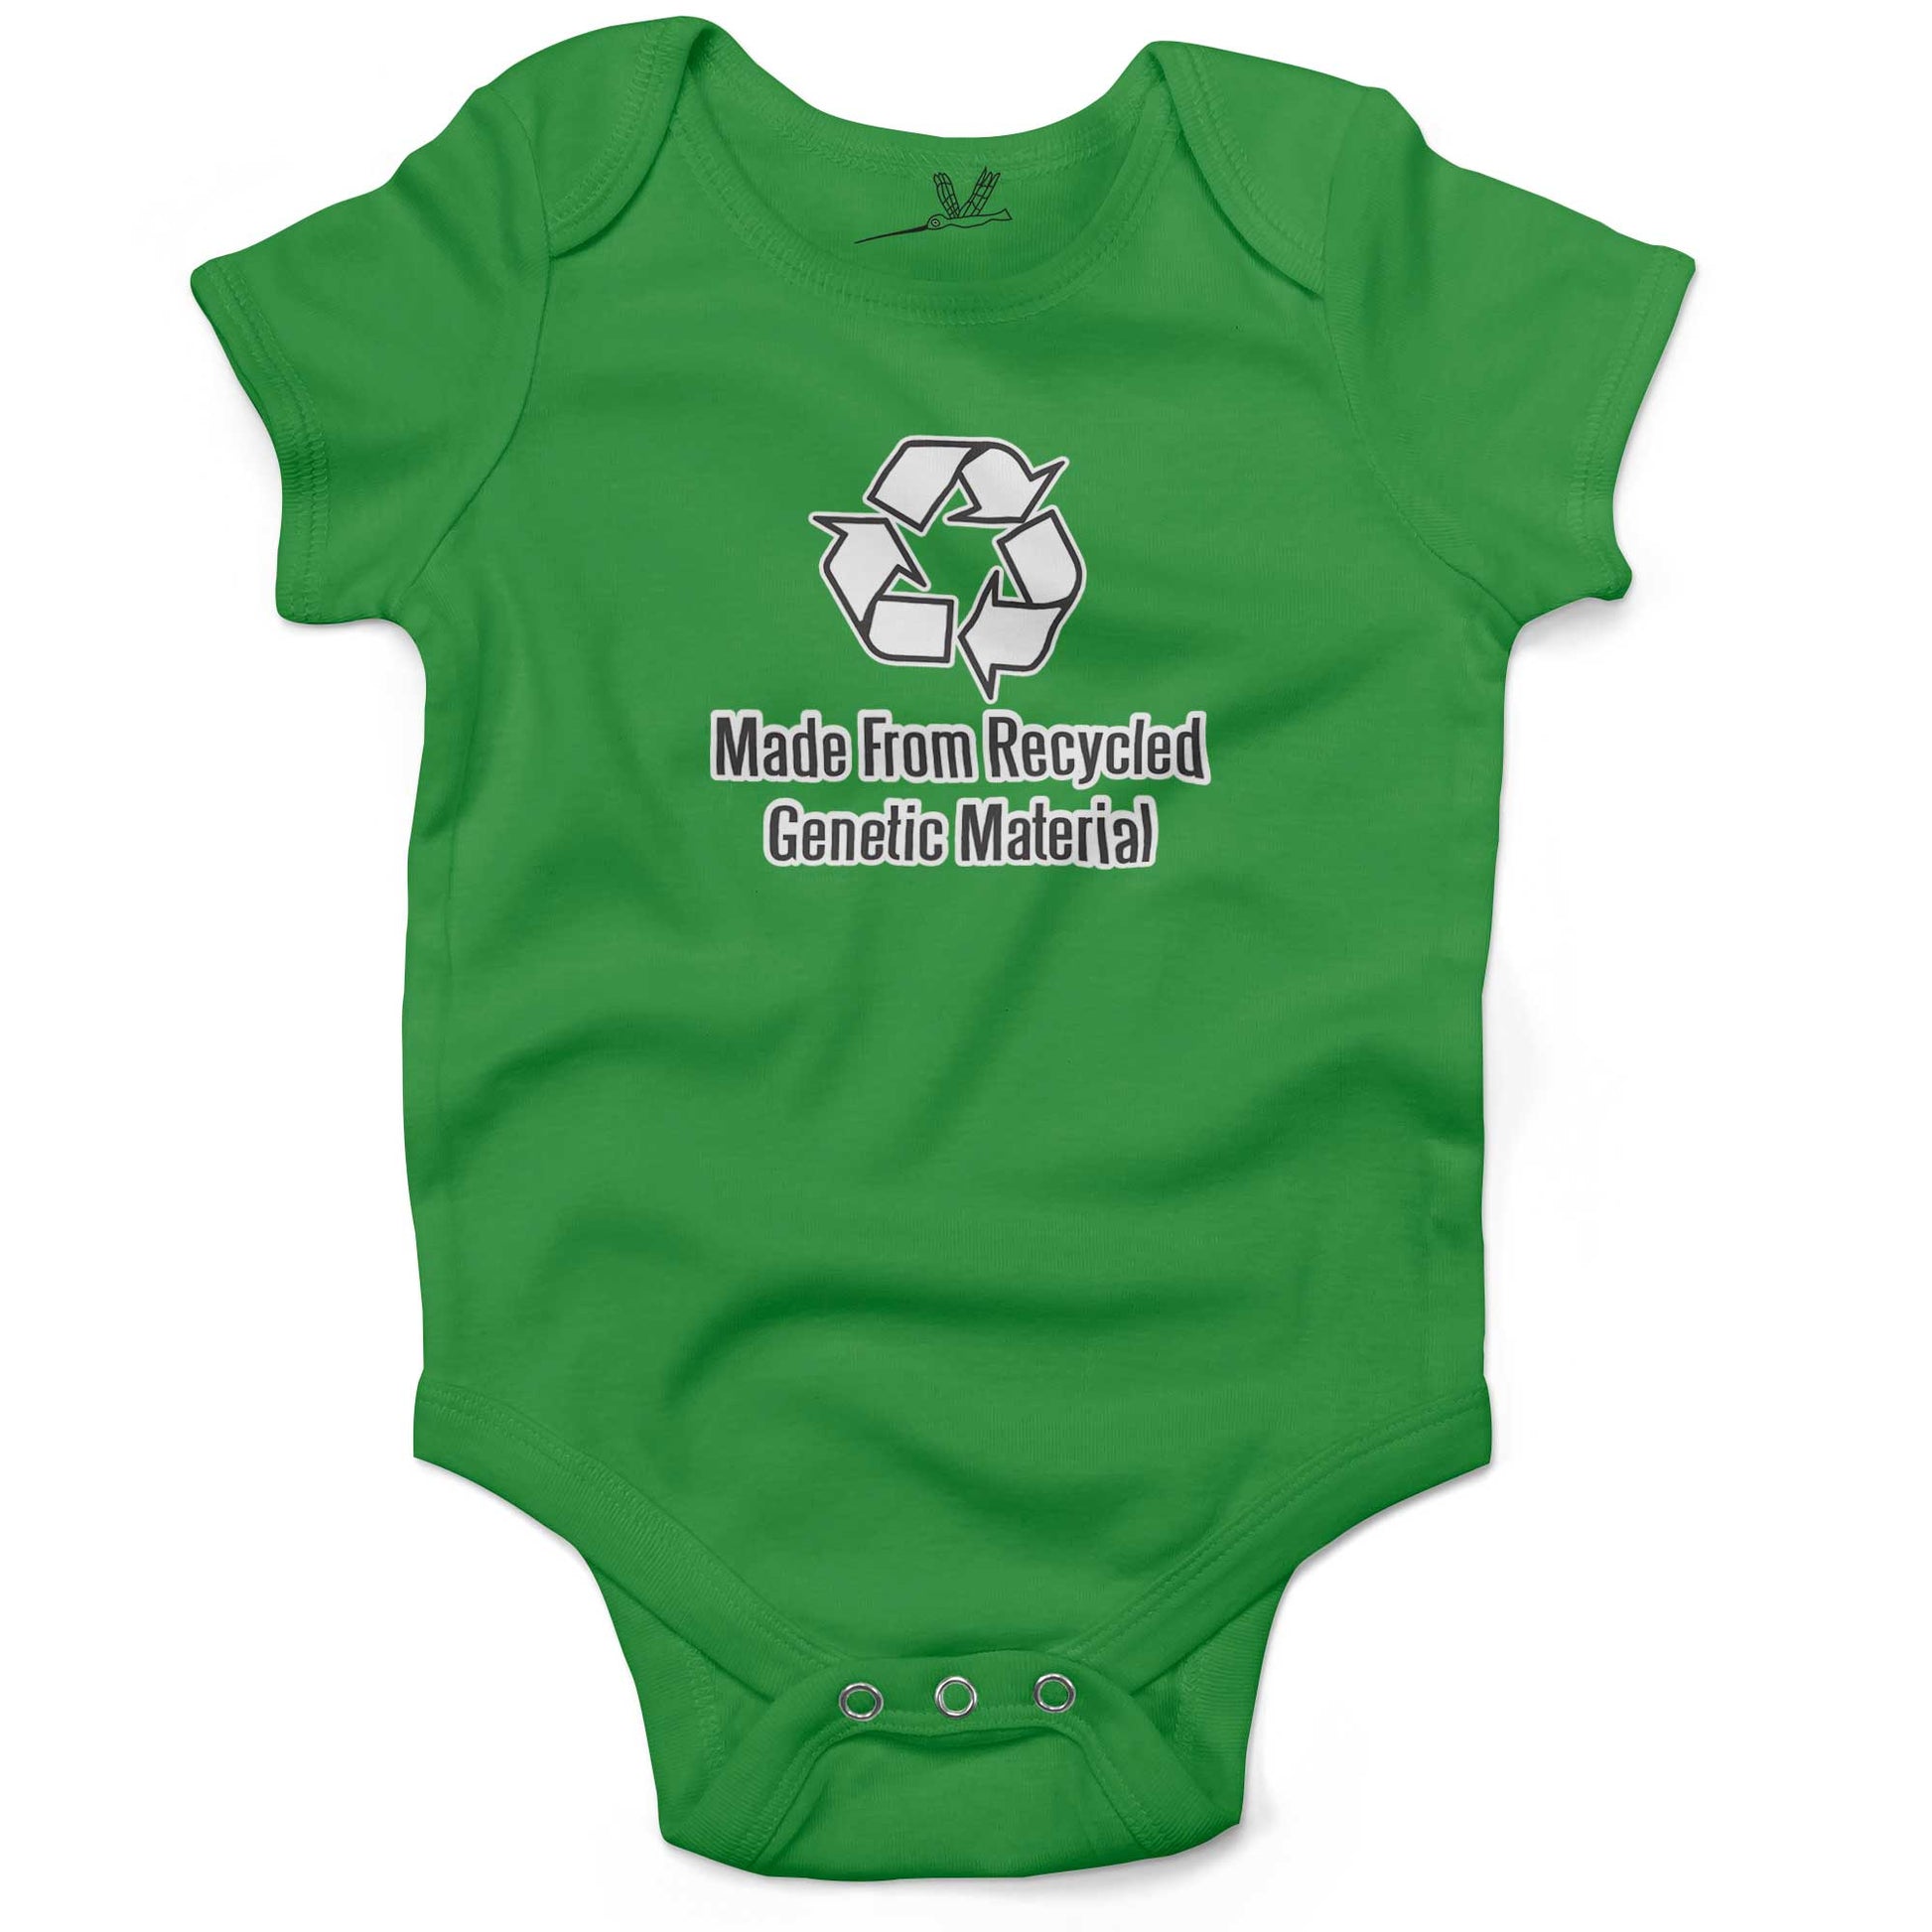 Made From Recycled Materials Infant Bodysuit or Raglan Baby Tee-Grass Green-3-6 months